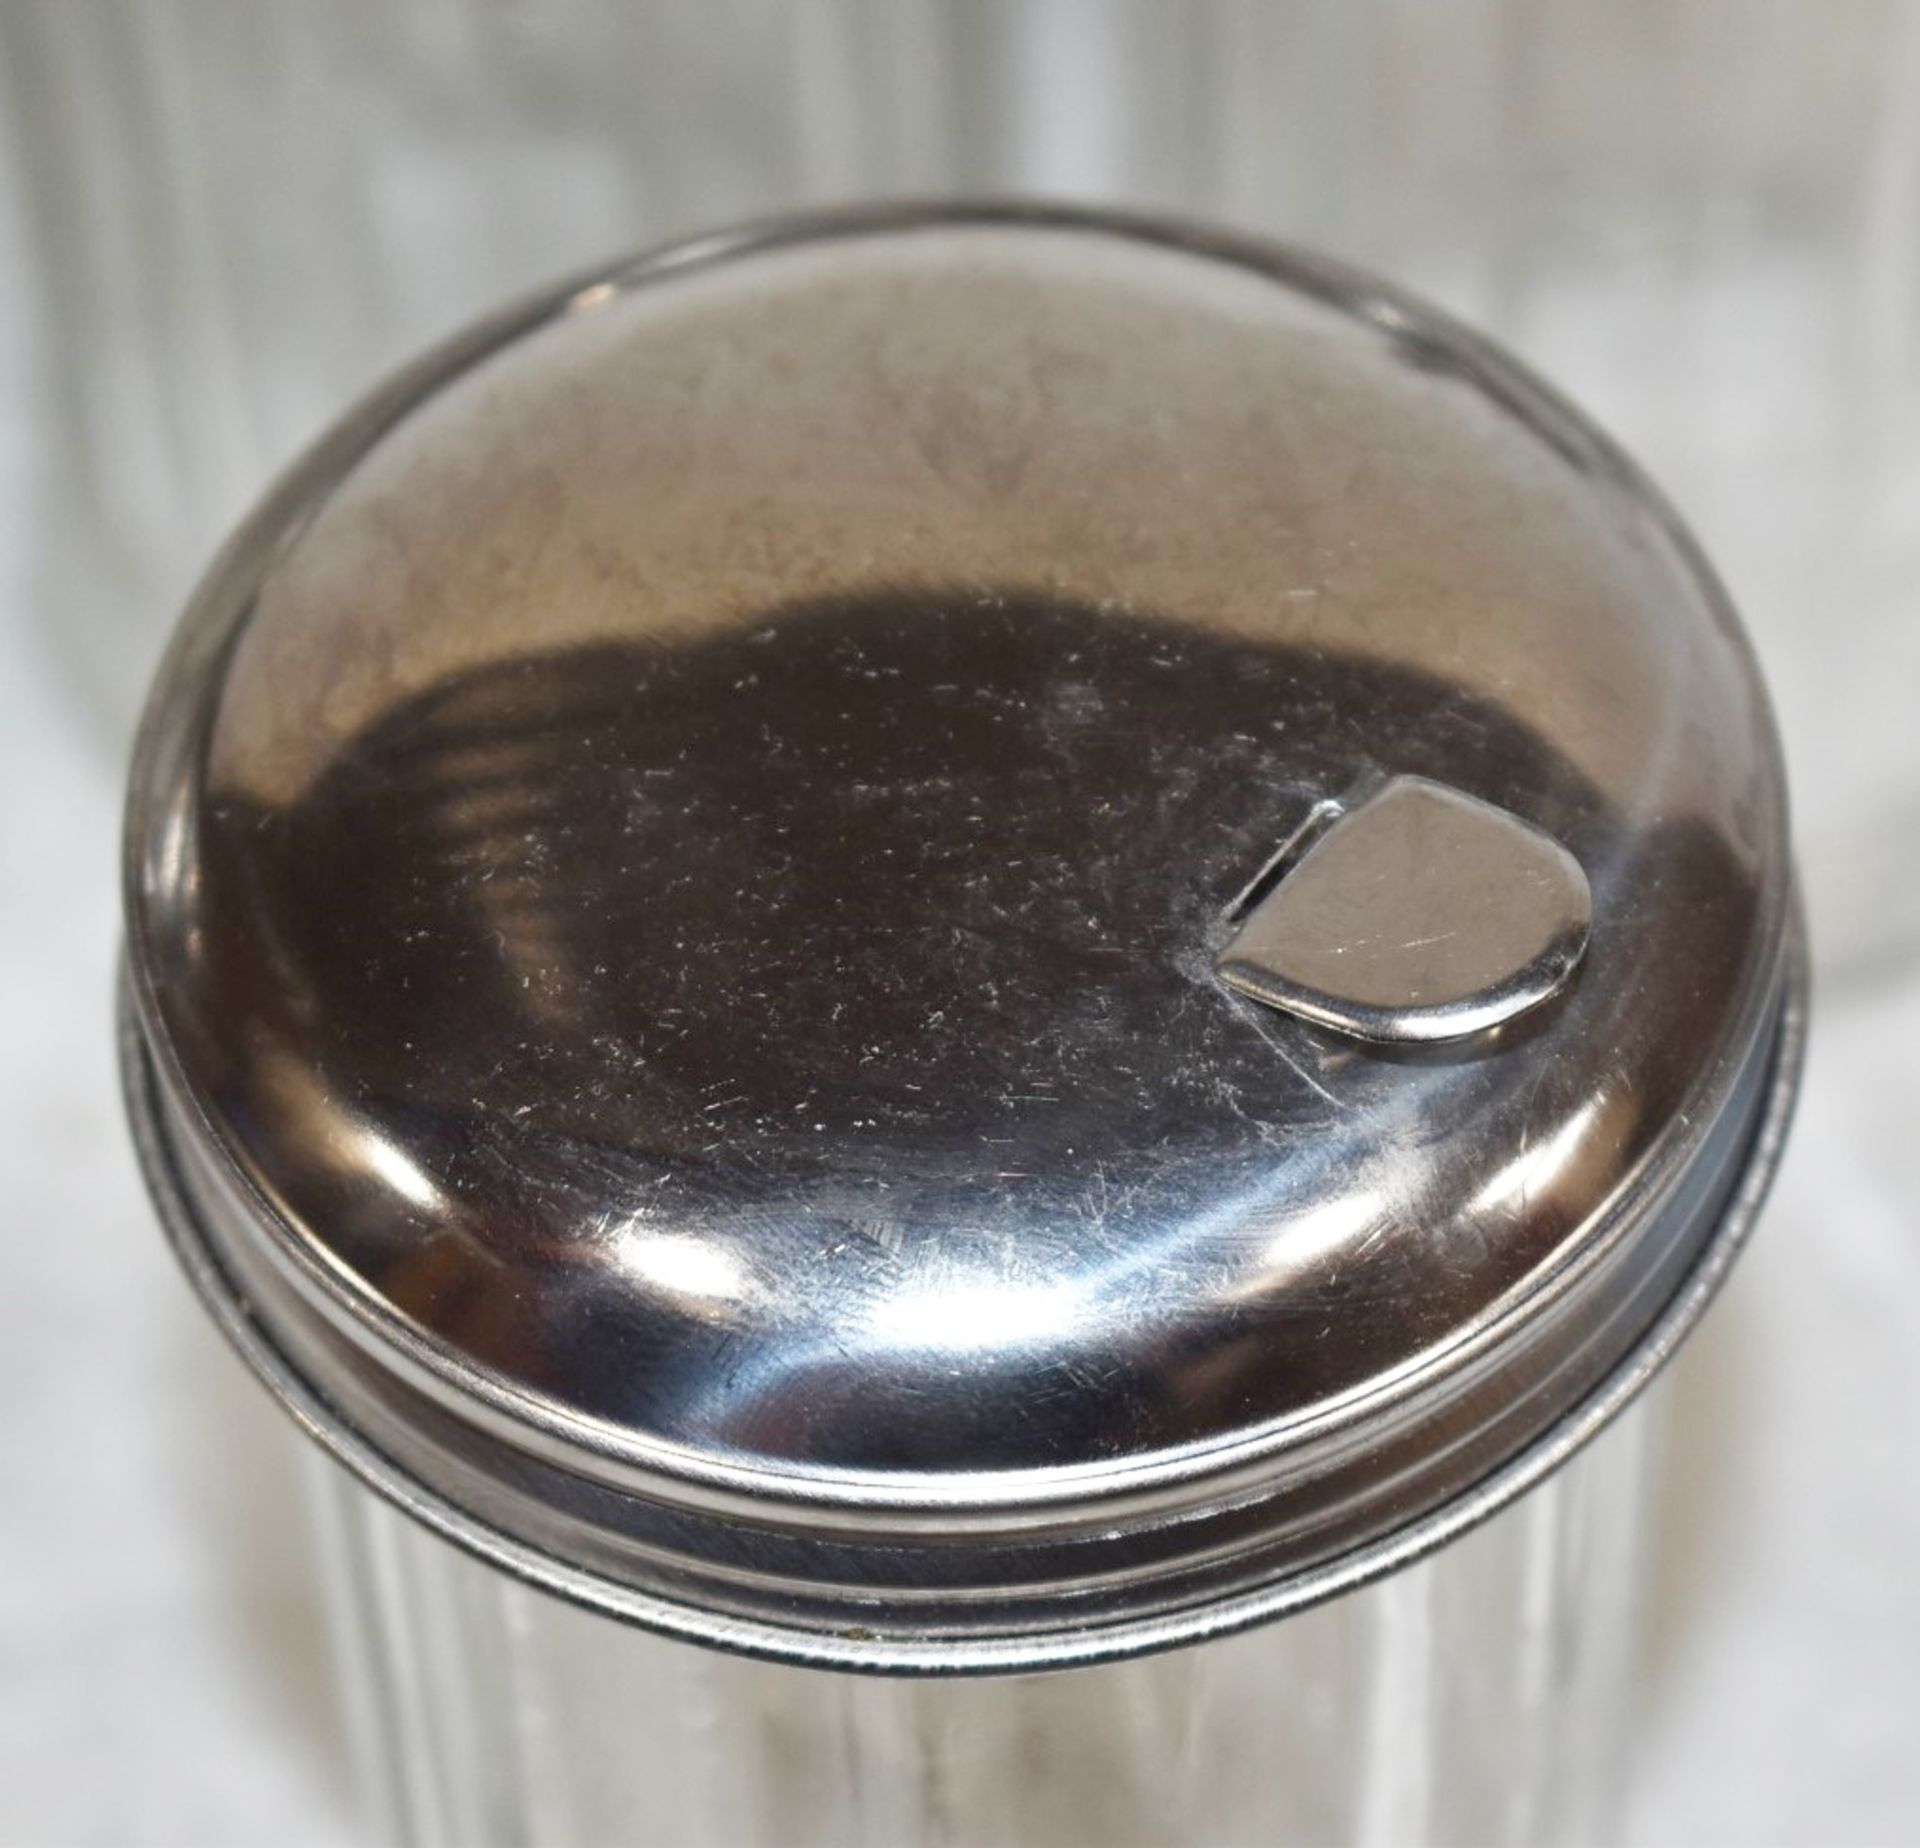 14 x Glass Sugar Dispensing Pots With Stainless Steel Lids - Suitable For Cafes or Restaurants - Image 2 of 8